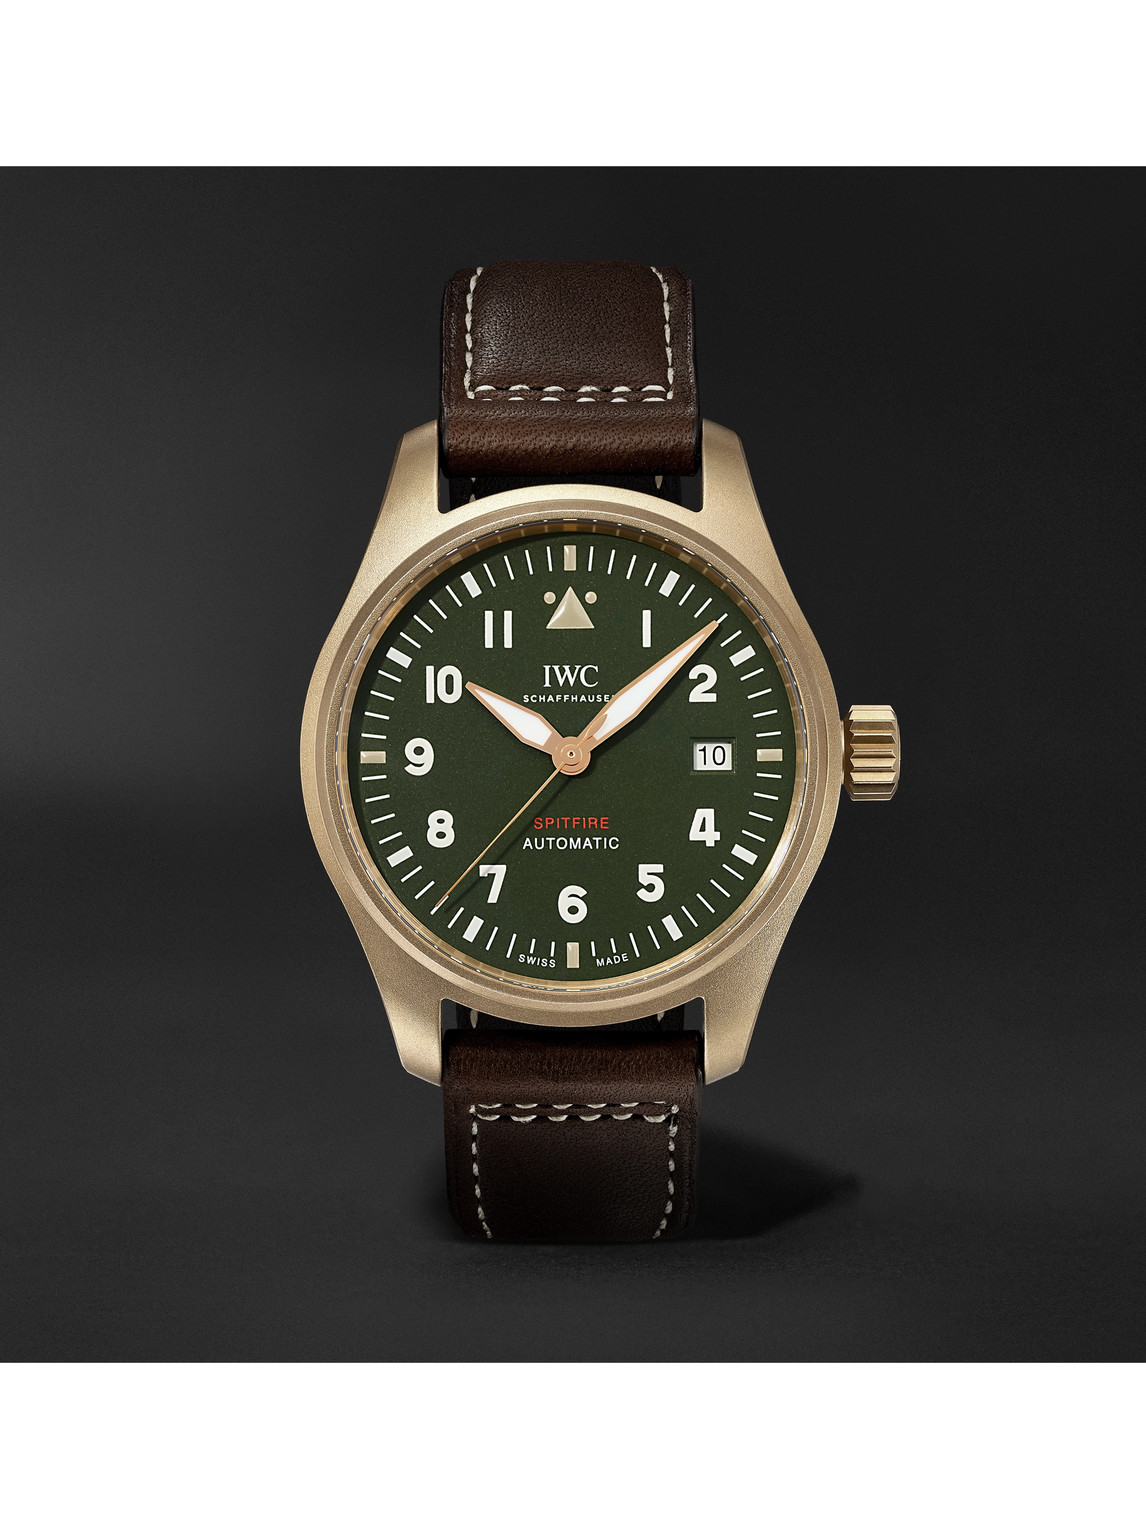 Pilot's Spitfire Automatic 39mm Bronze and Leather Watch, Ref. No. IW326802